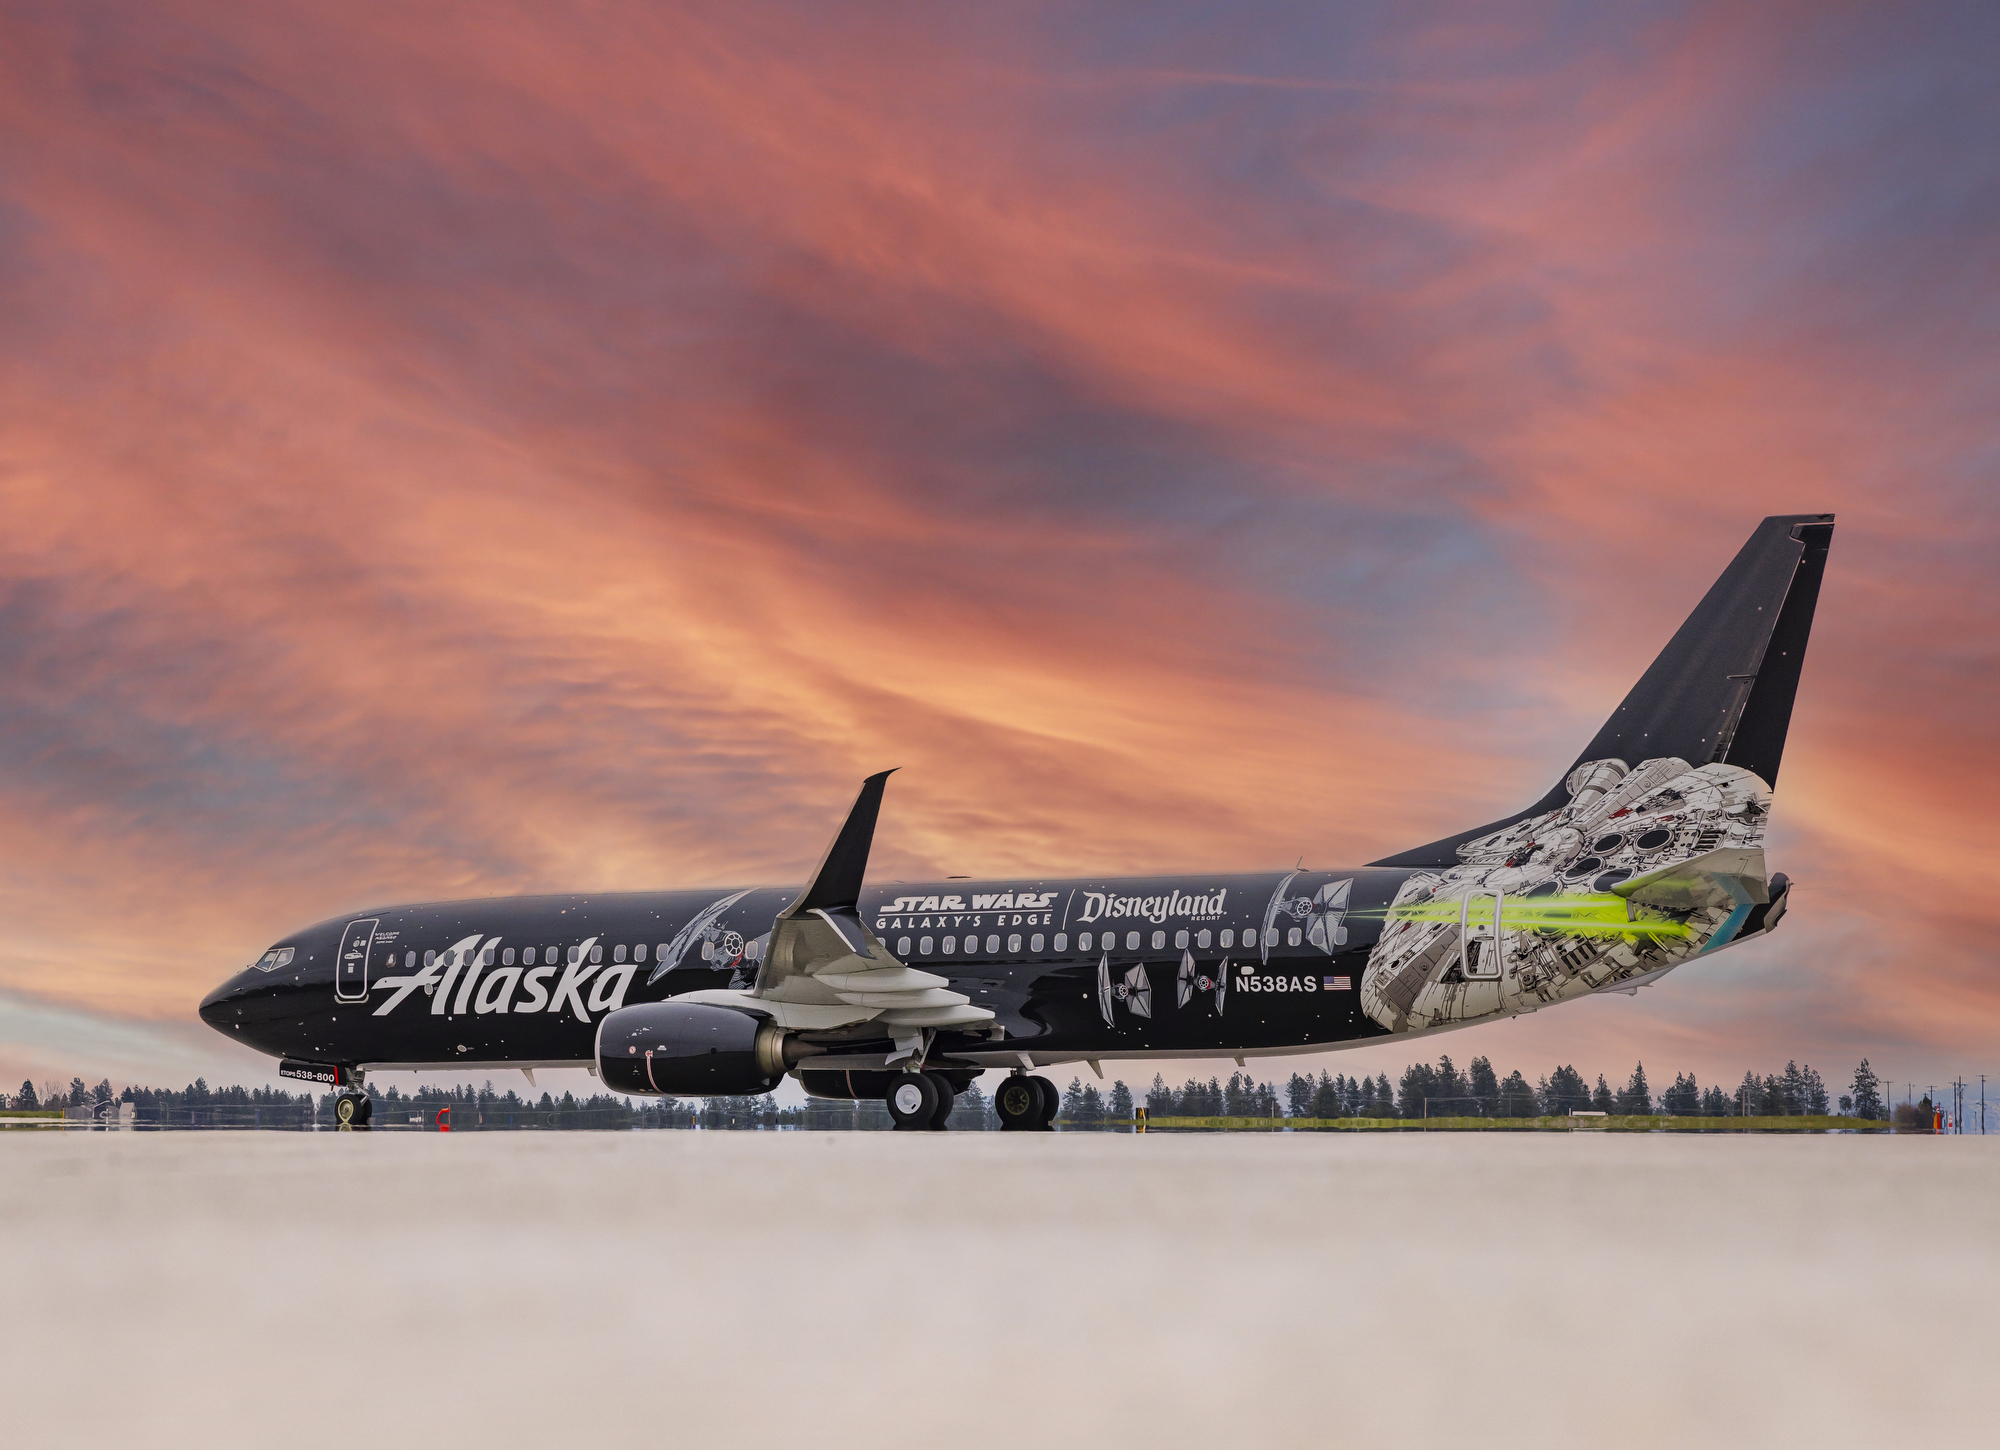 PHOTOS: One-of-a-Kind 'Star Wars' Plane Revealed by Alaska Airlines | disney food